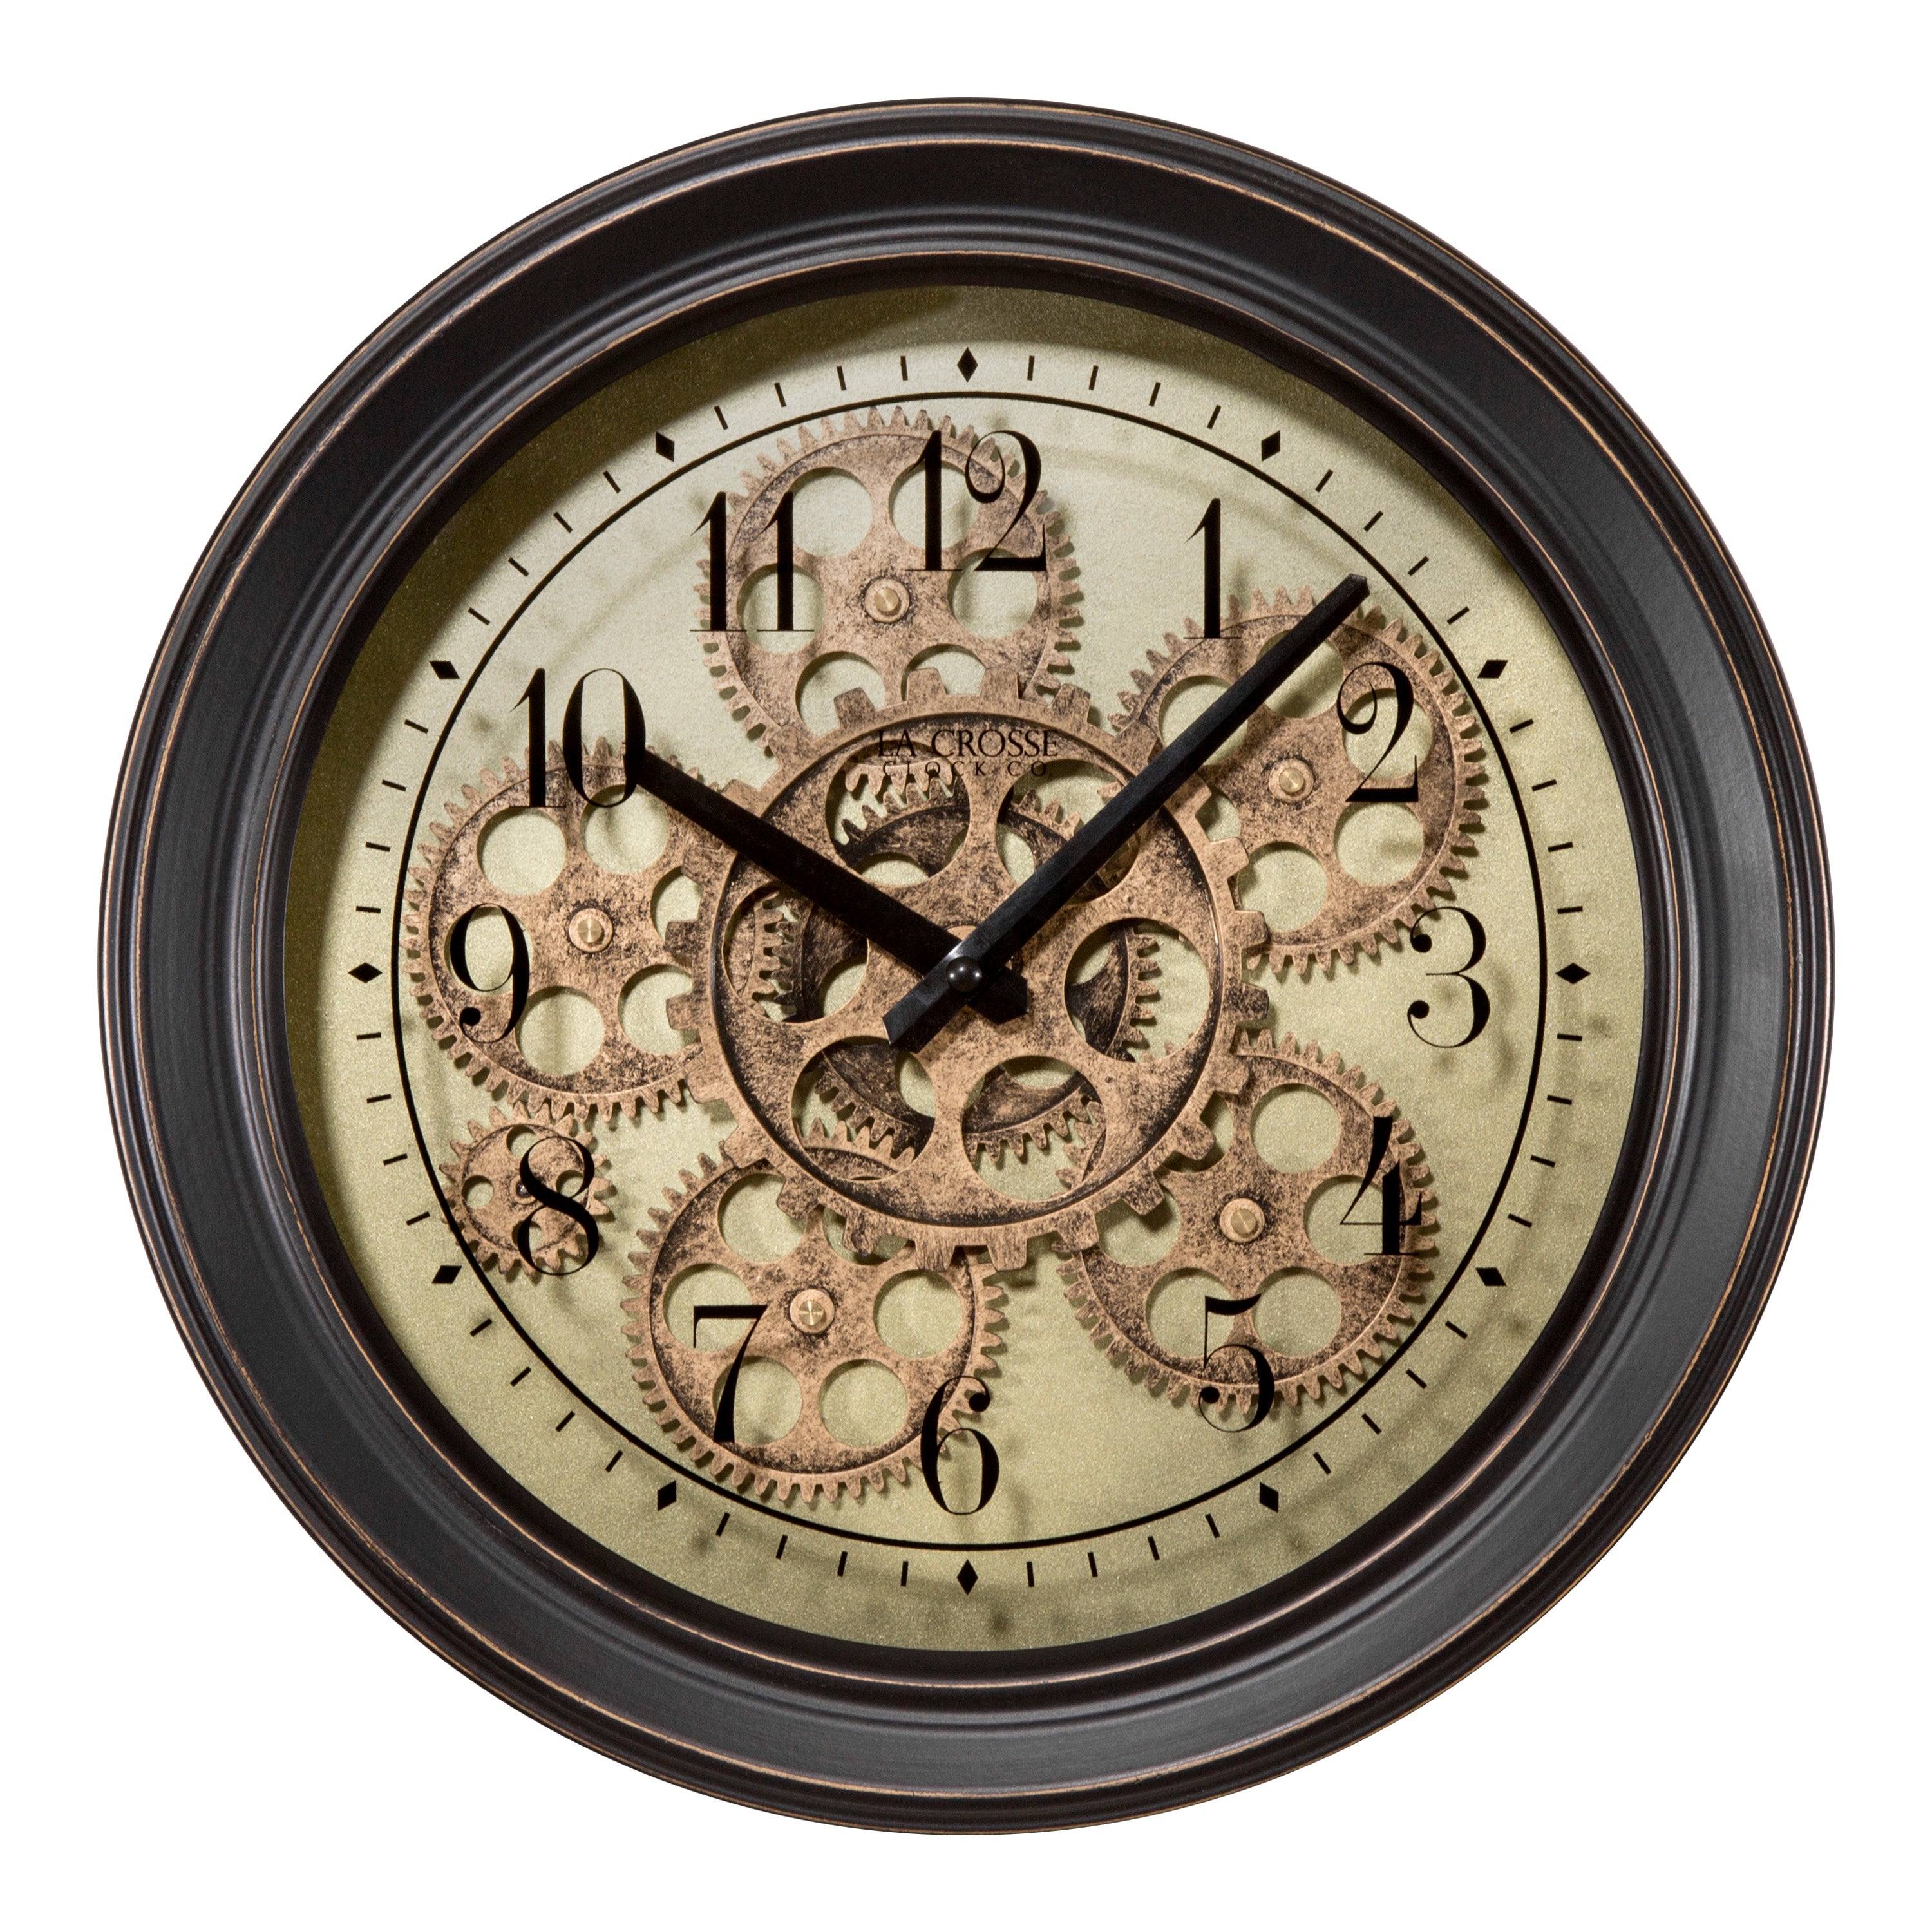 New Era Black Metal Weathered Wood Face Moving Gears Wall Clock